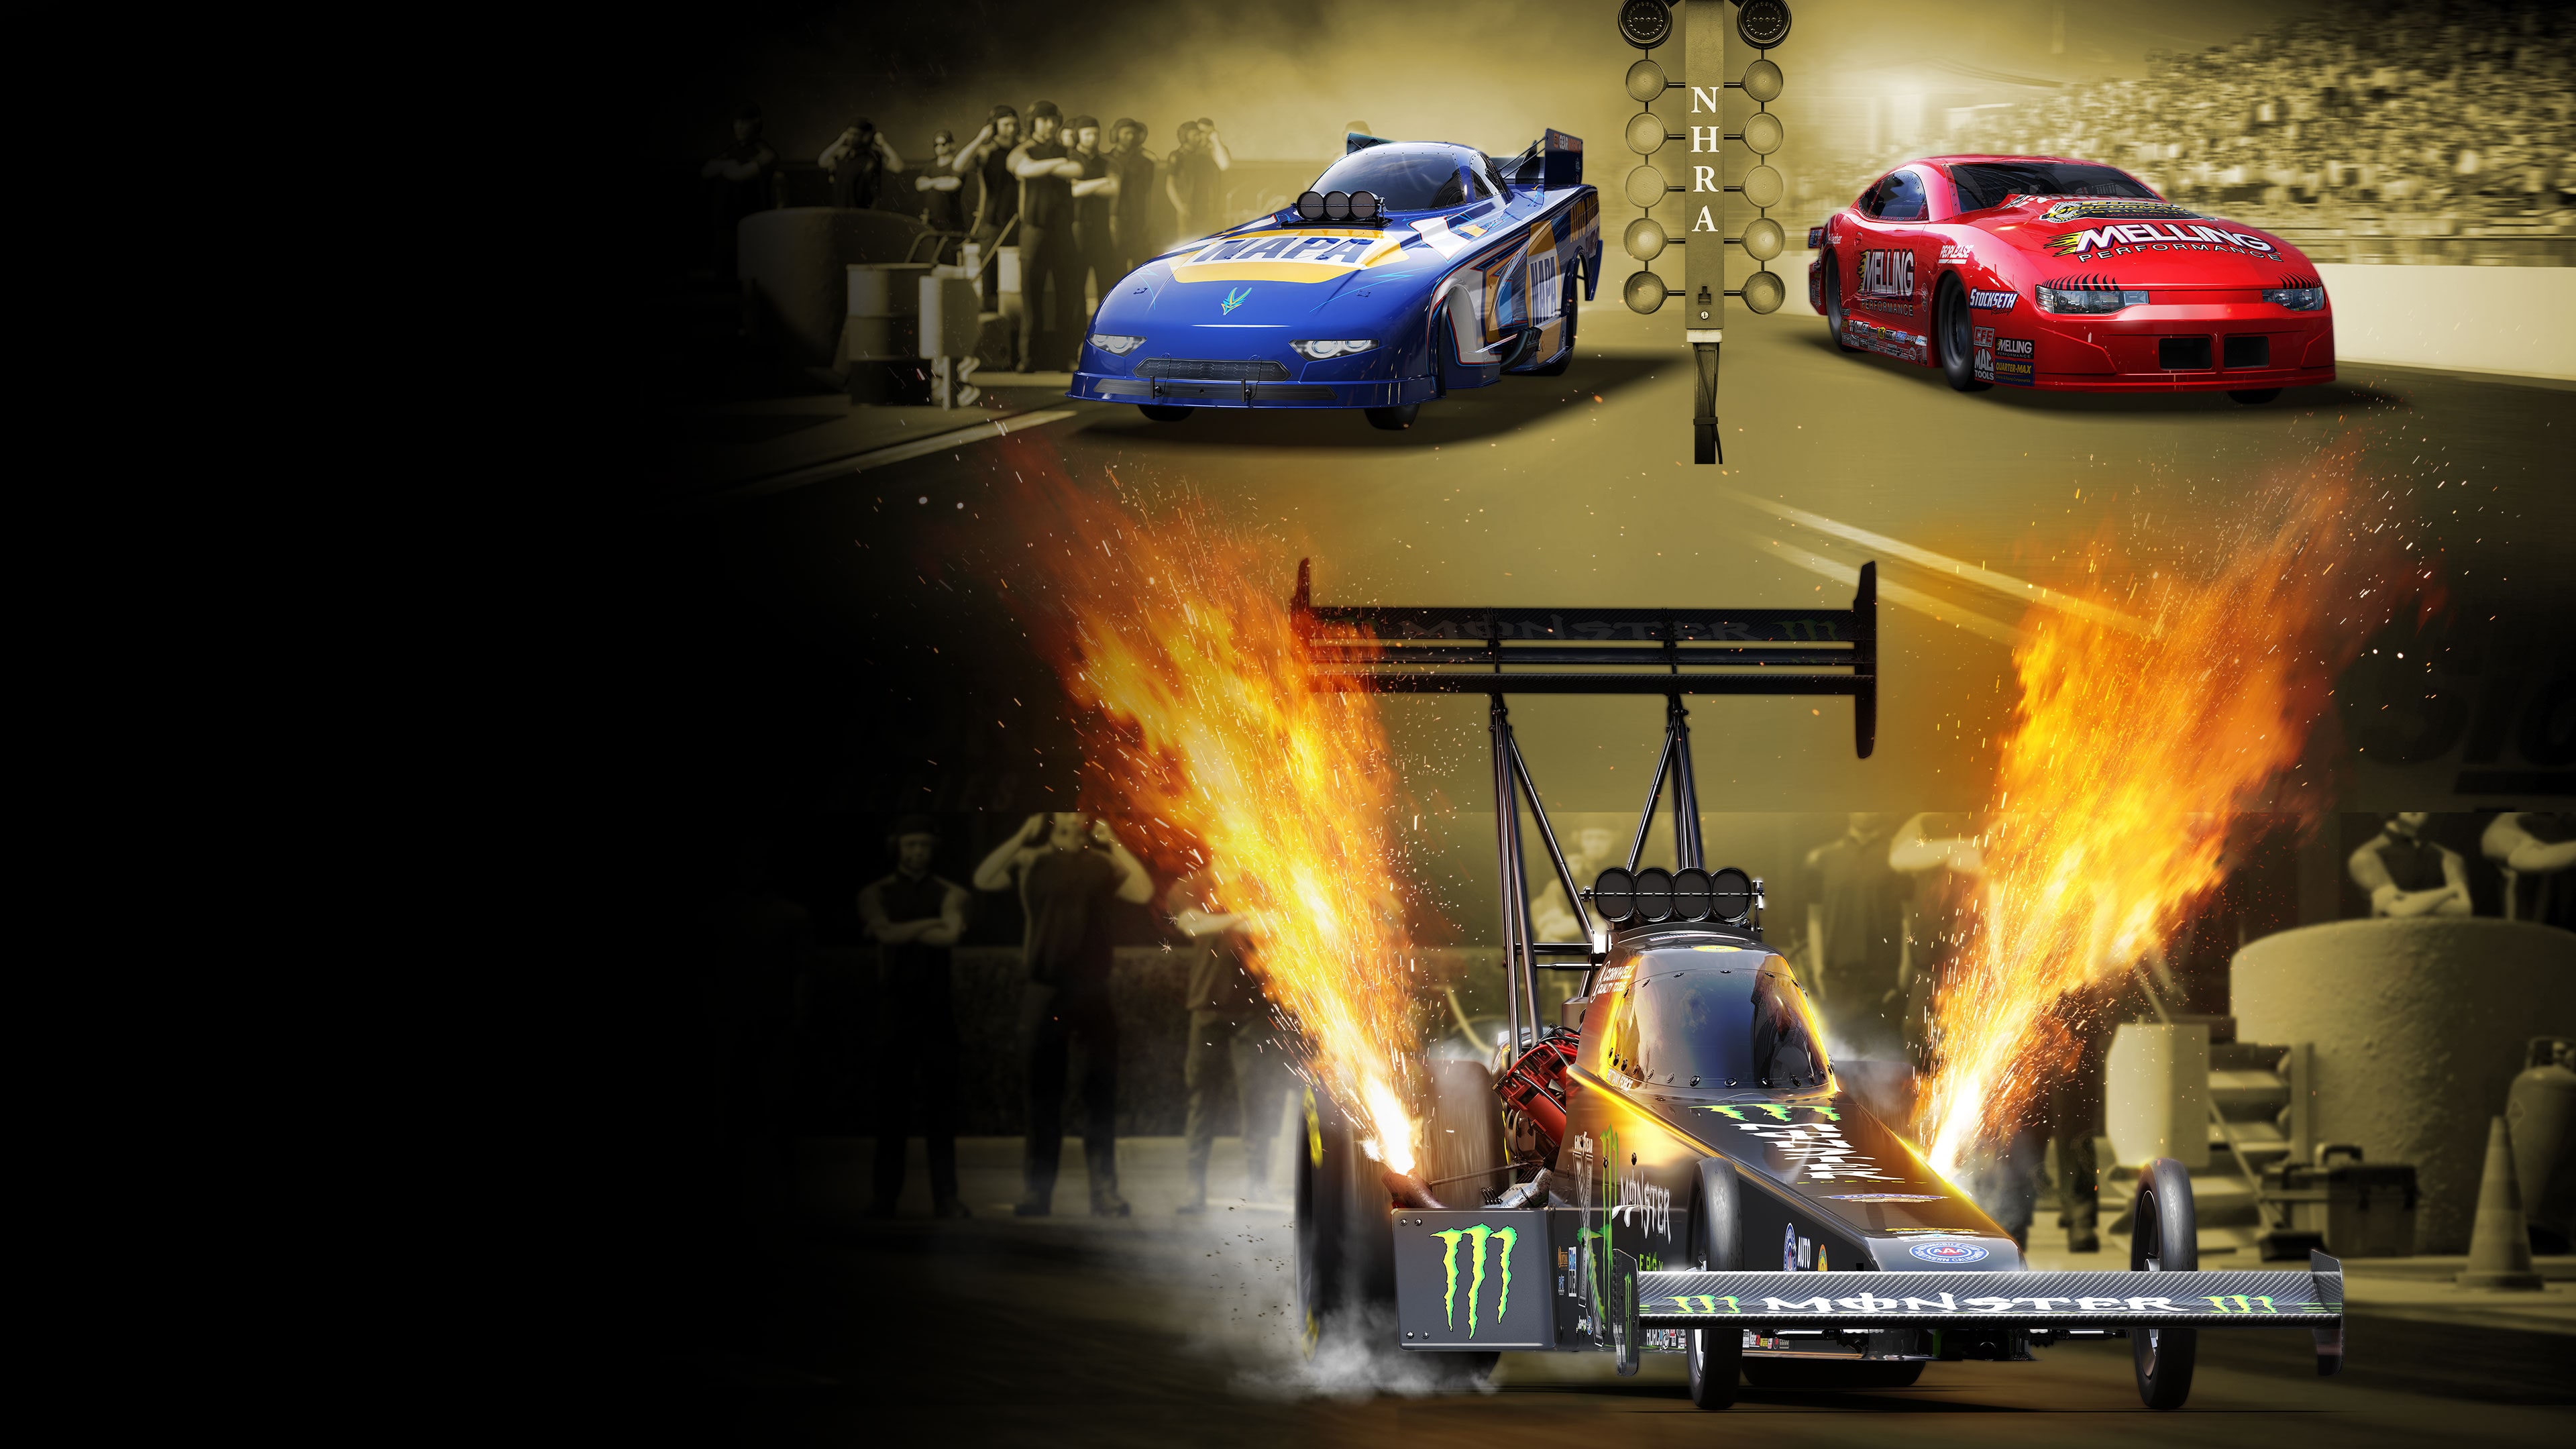 NHRA Championship Drag Racing: Speed For All - Ultimate Edition